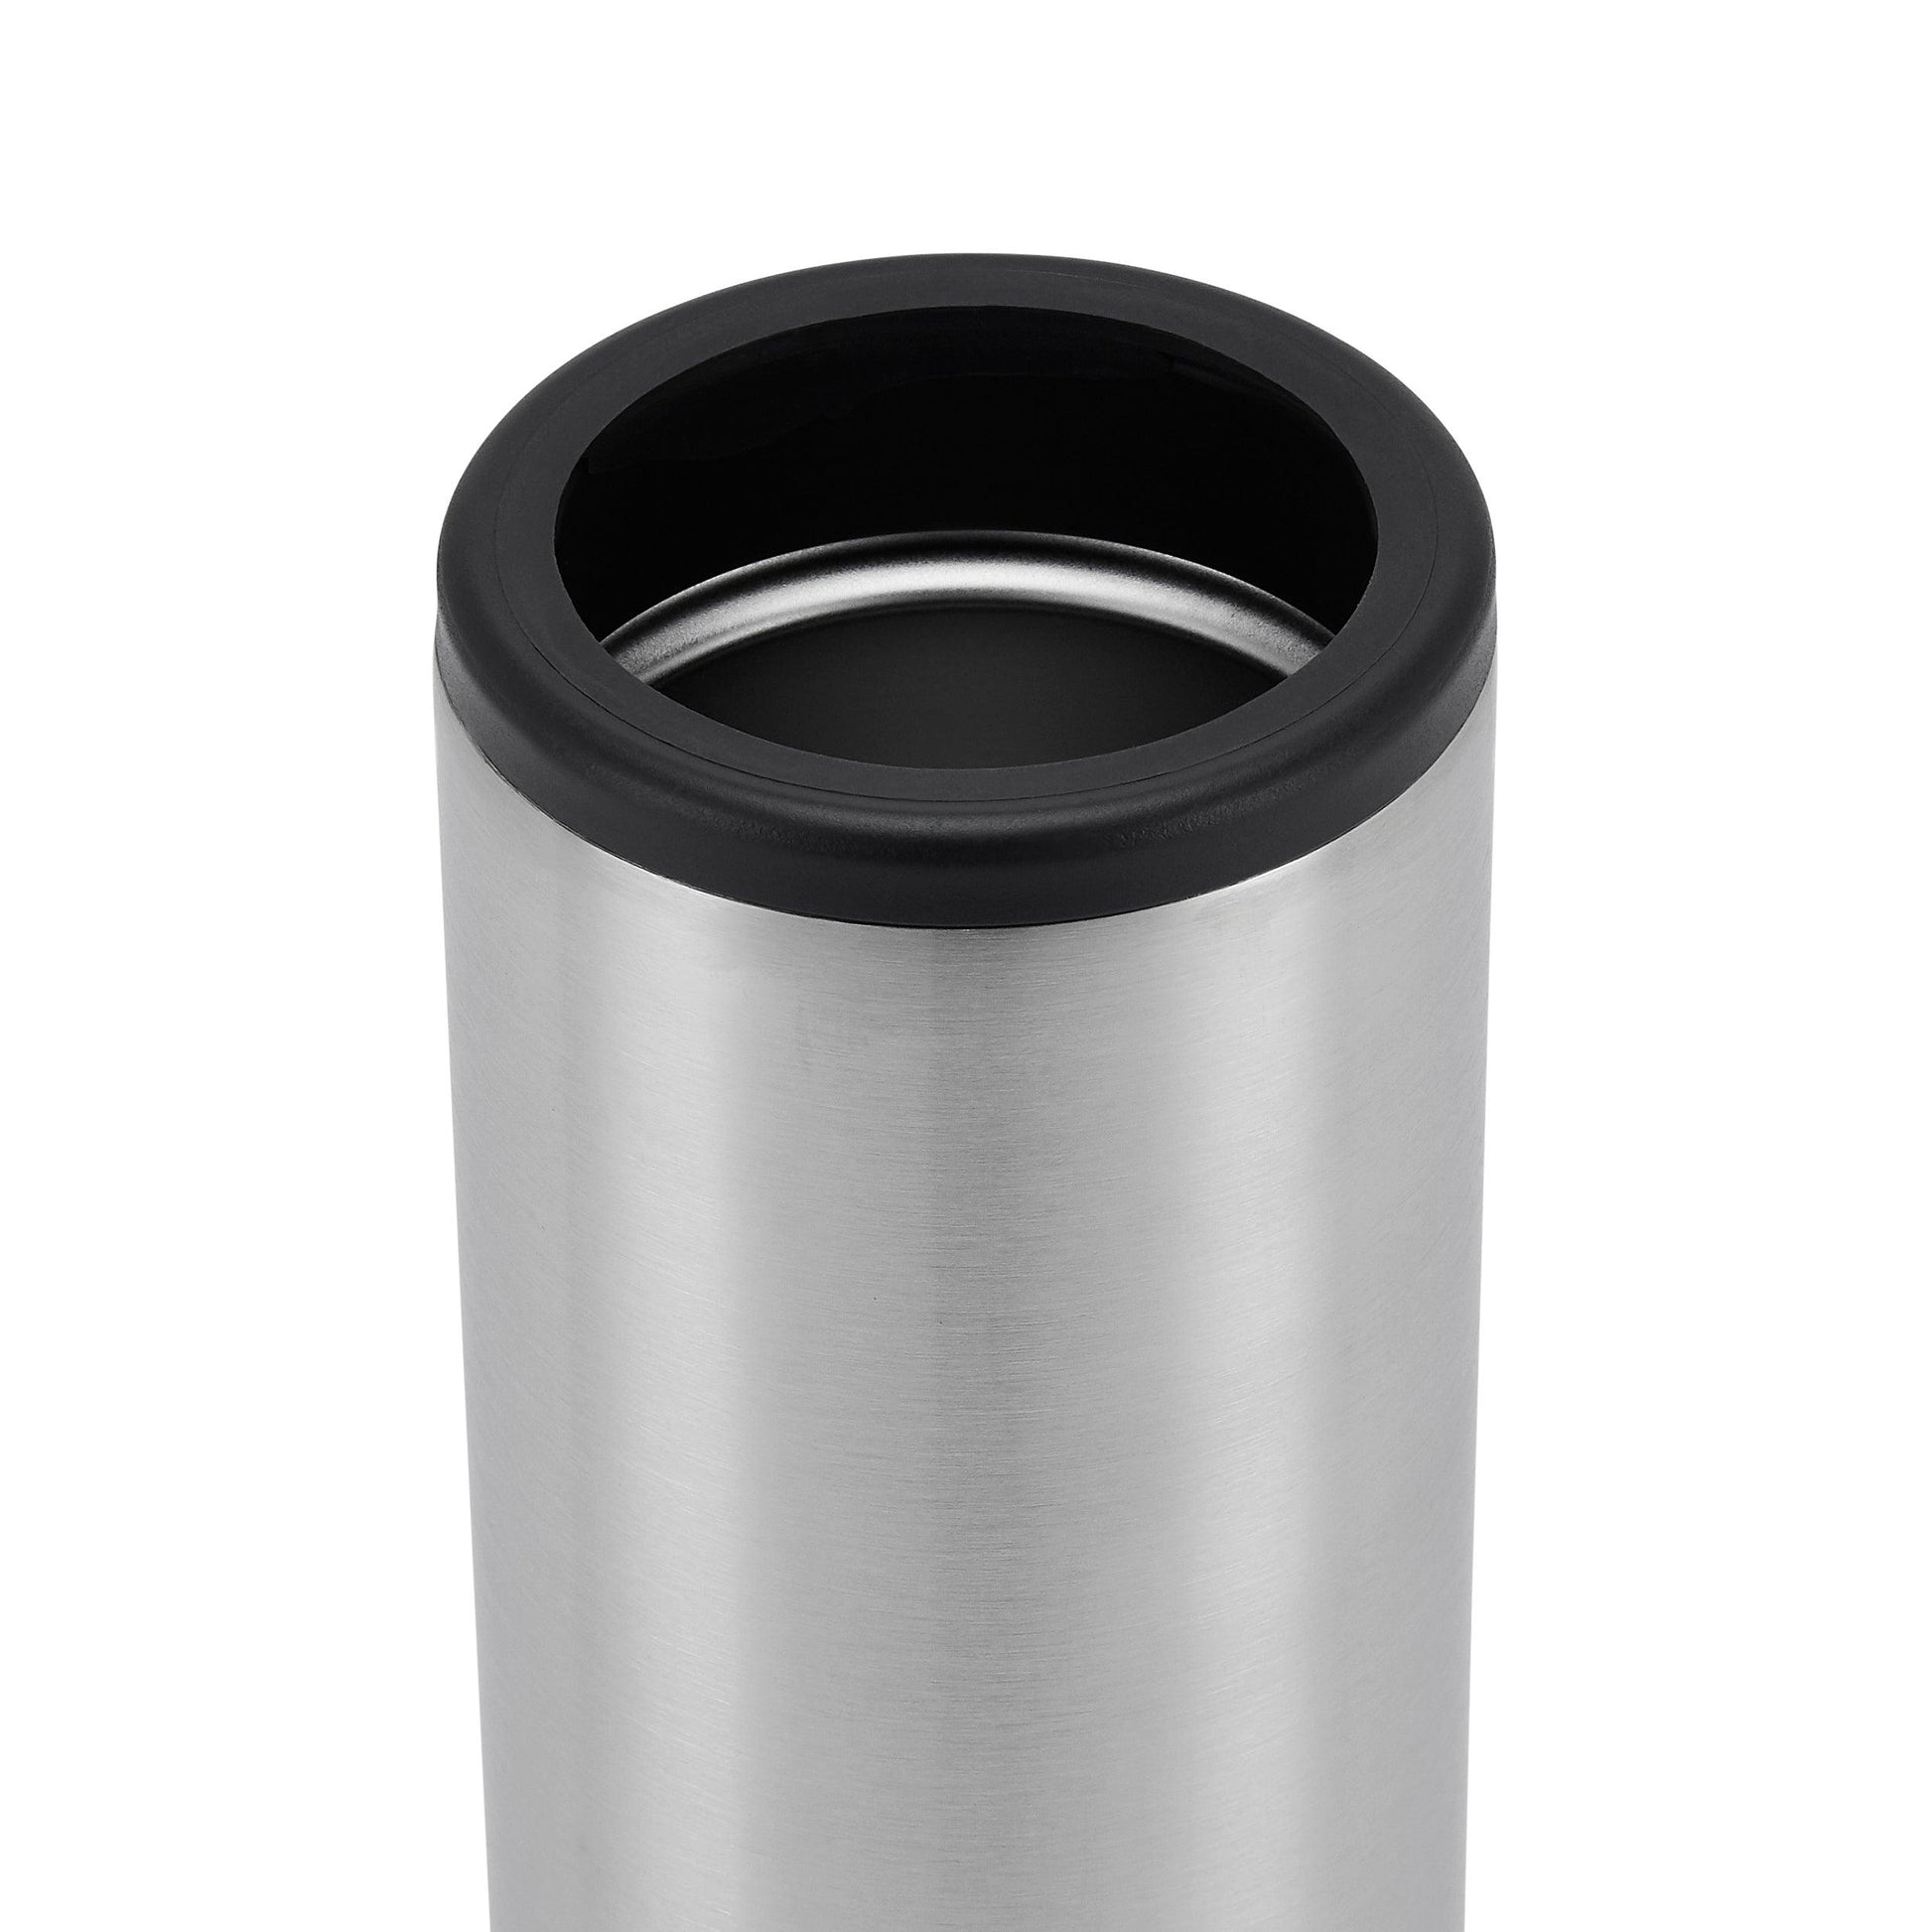 SquidCup Slim Sqoozie Non-Tipping Insulated Can Holder - 12 oz. Slim